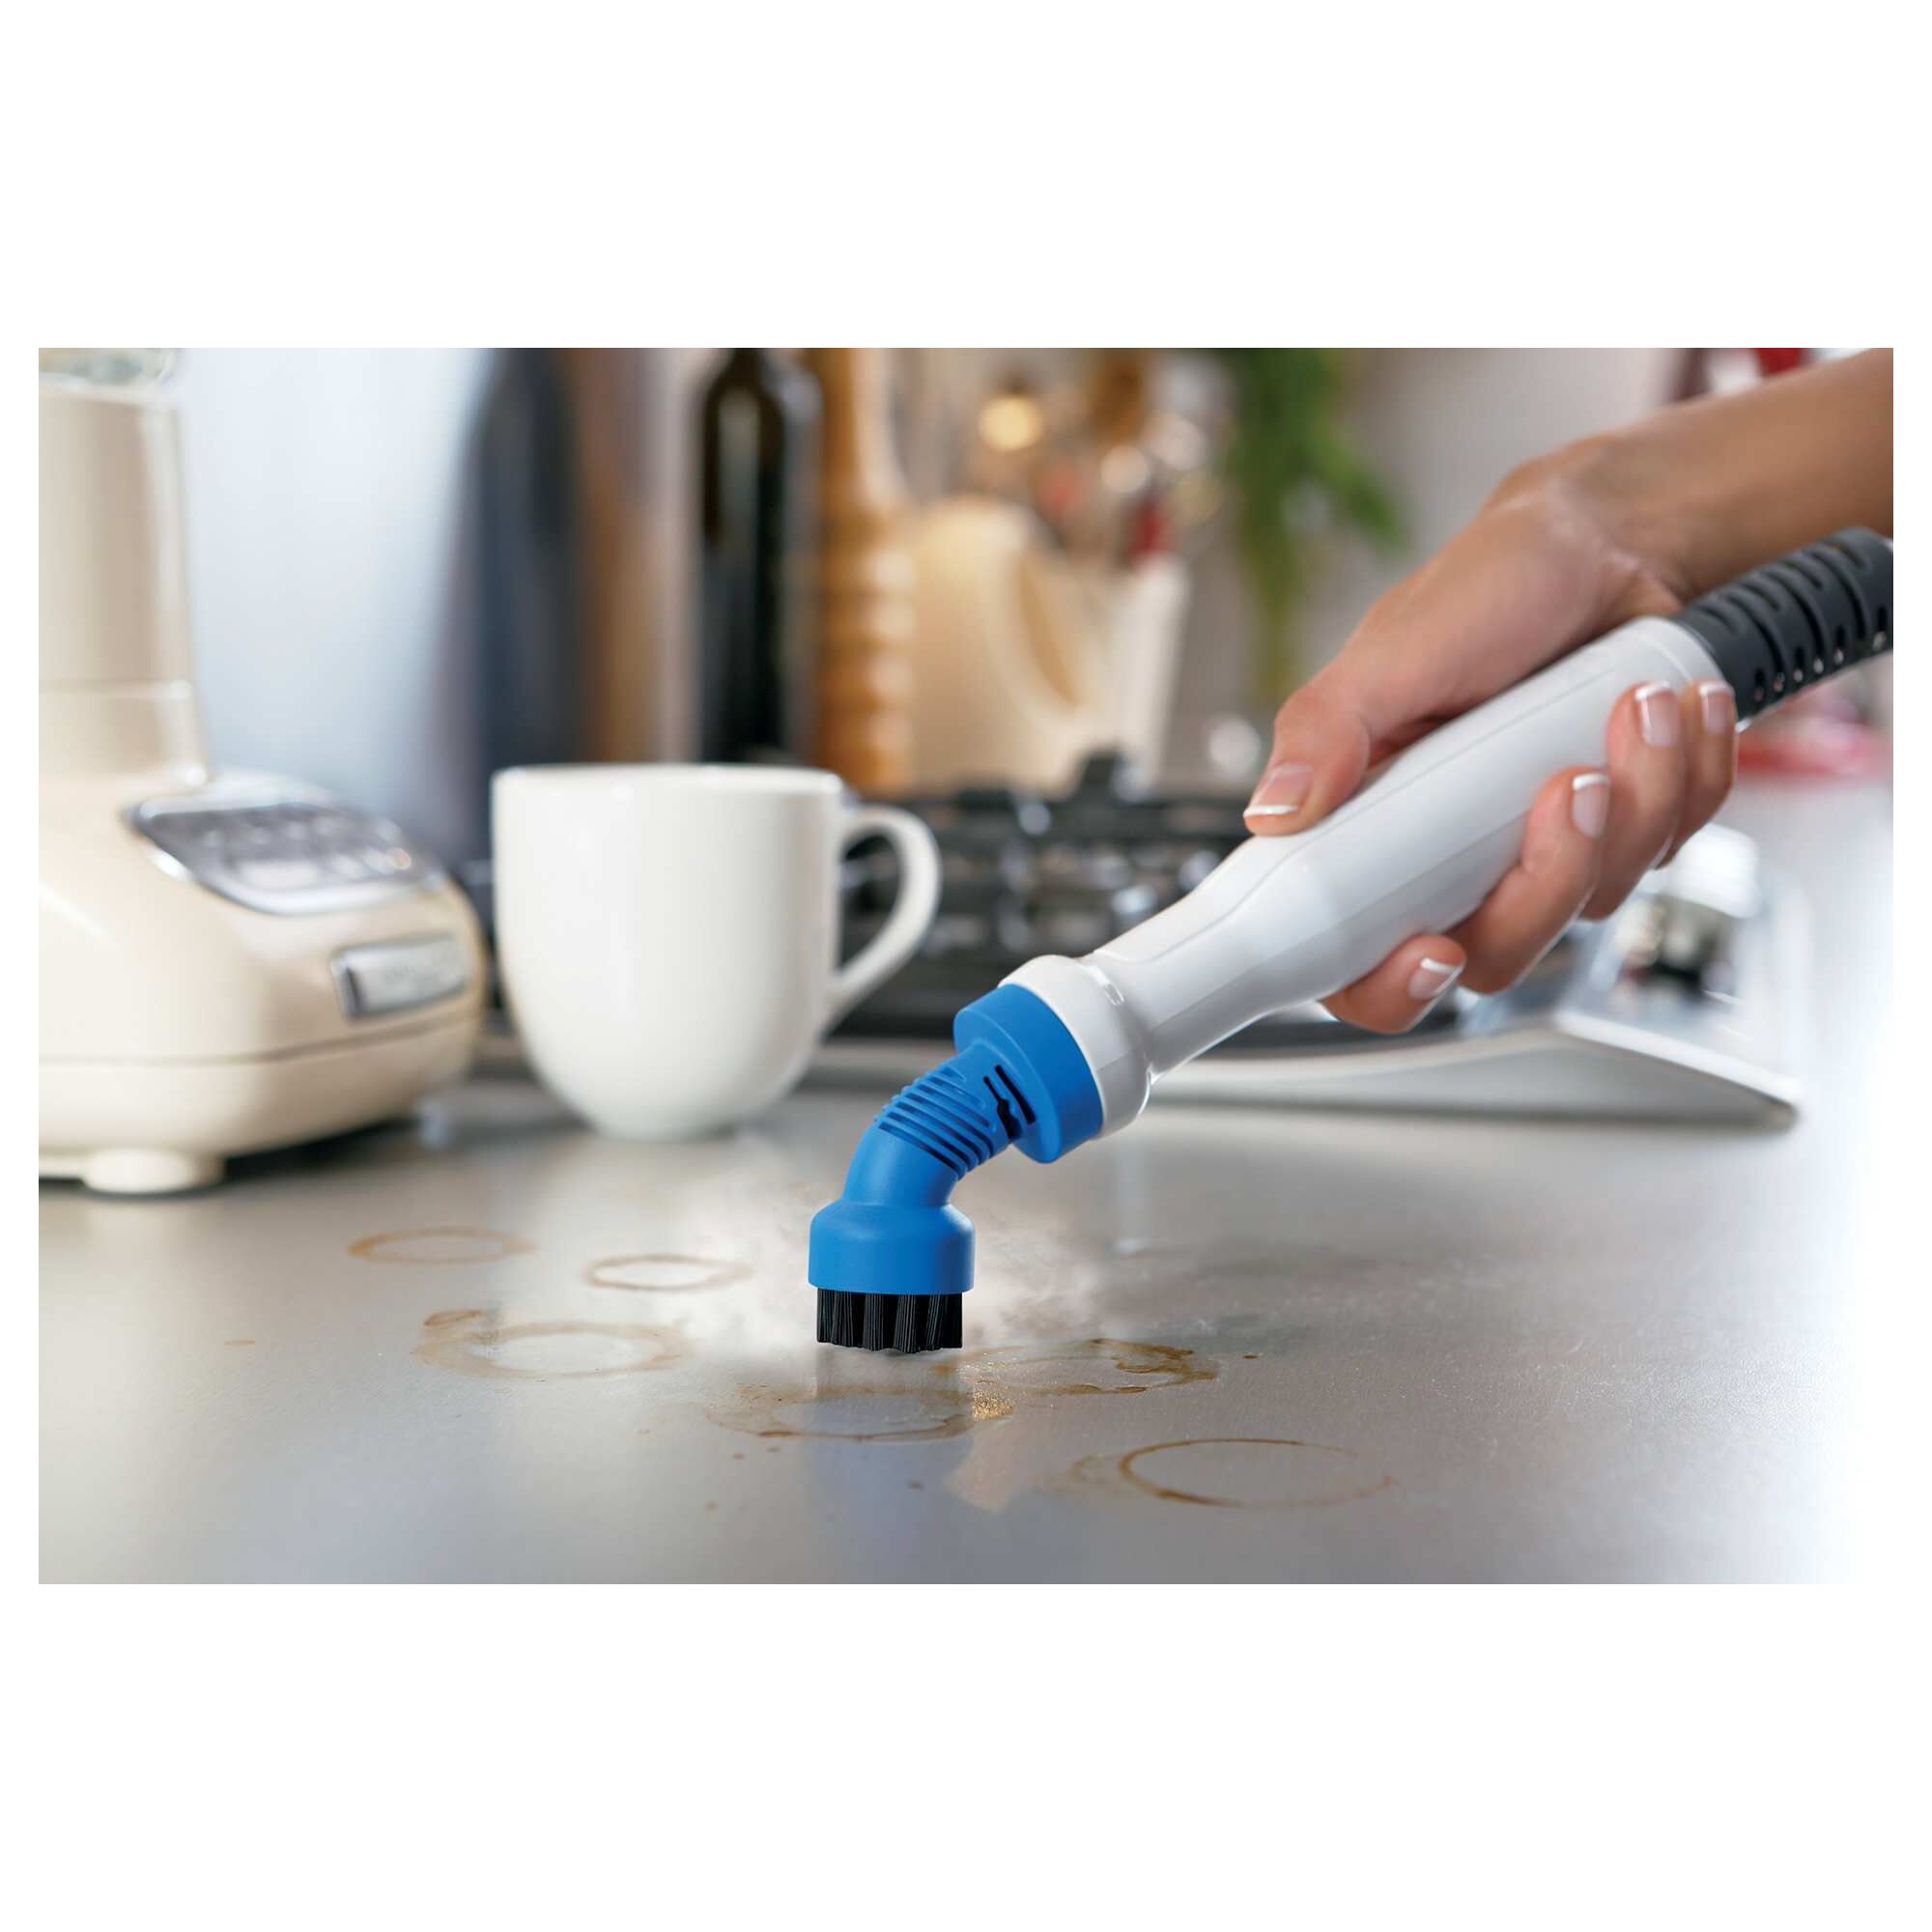 7 in 1 steam mop with steamglove handheld steamer being used.